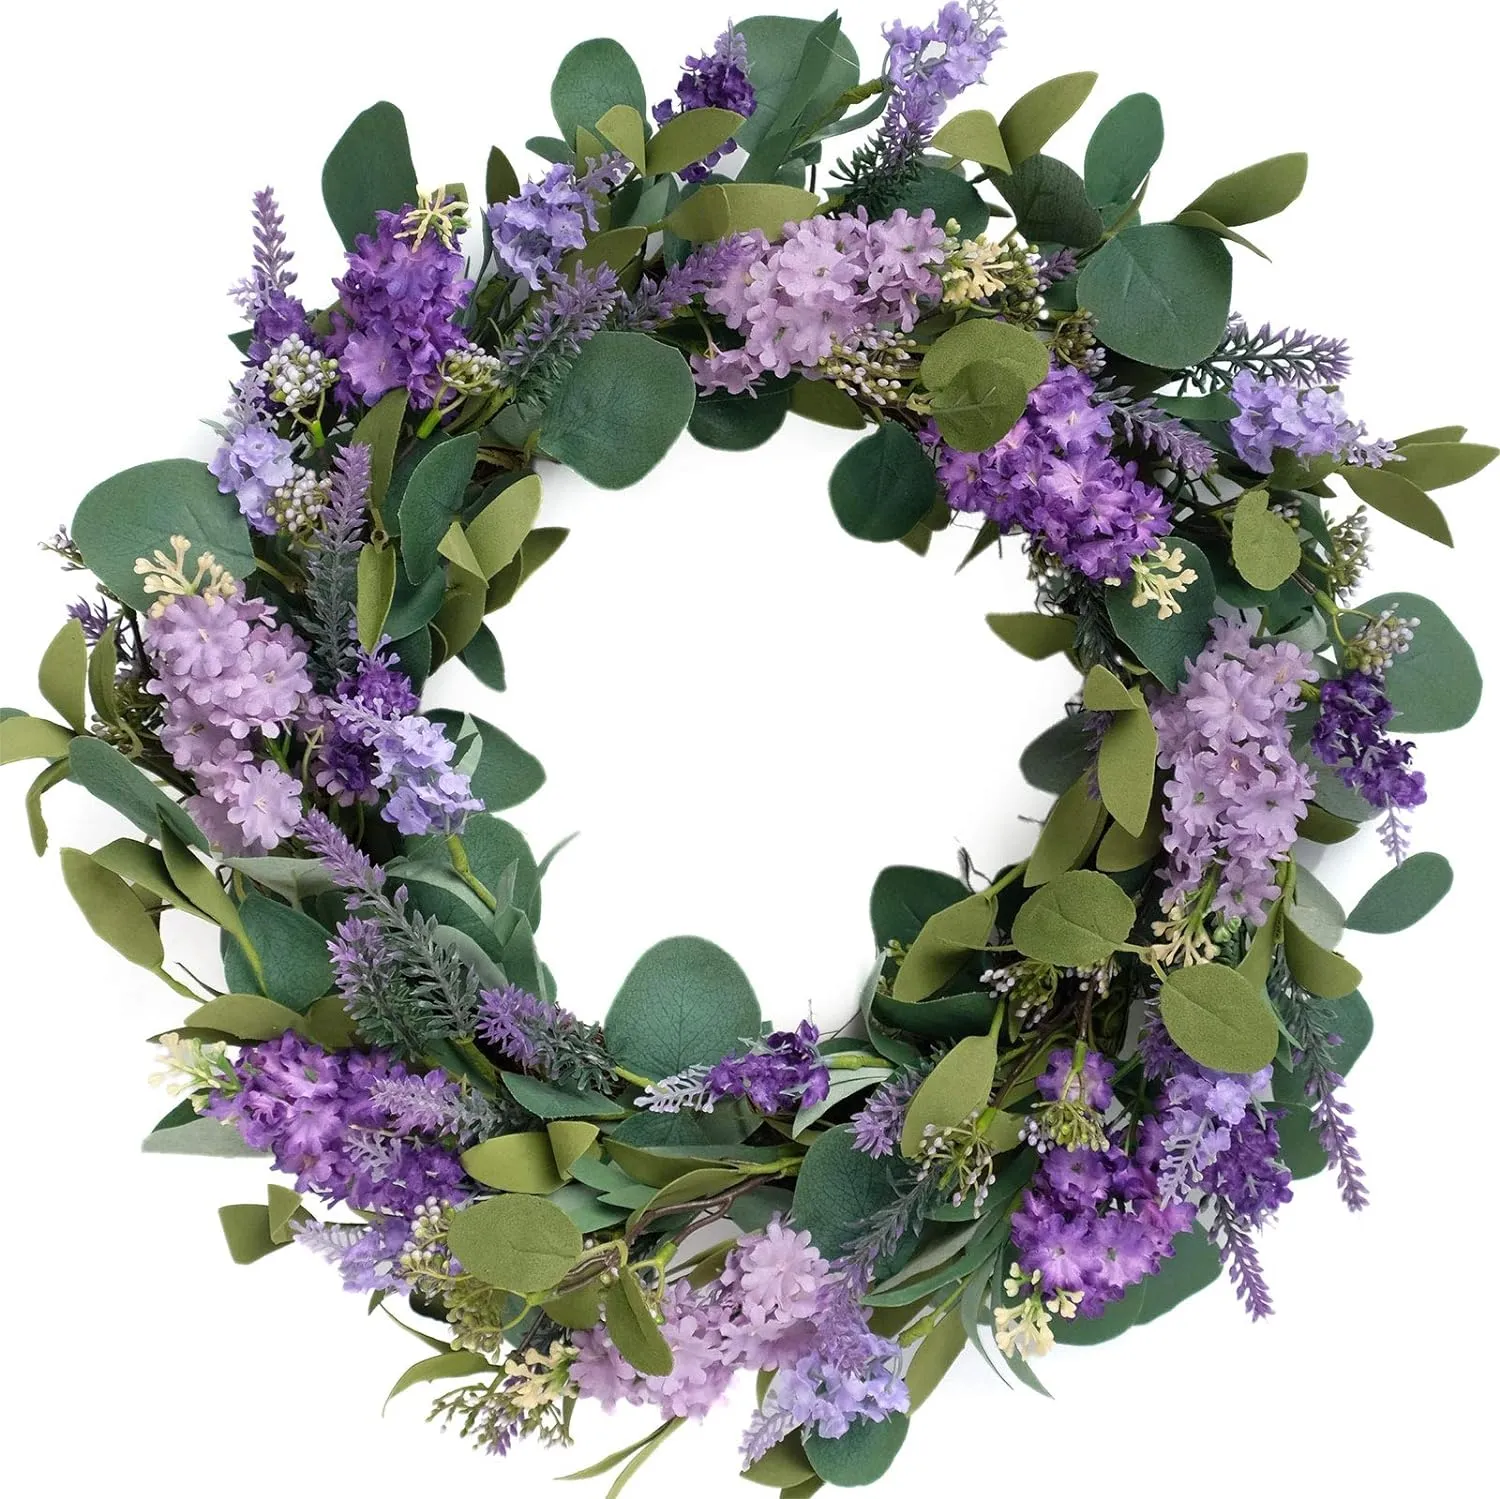 Eucalyptus Artificial Flower Leaves Rustic Farmhouse Decorative Floral Wreath for Front Door Window Wedding Spring